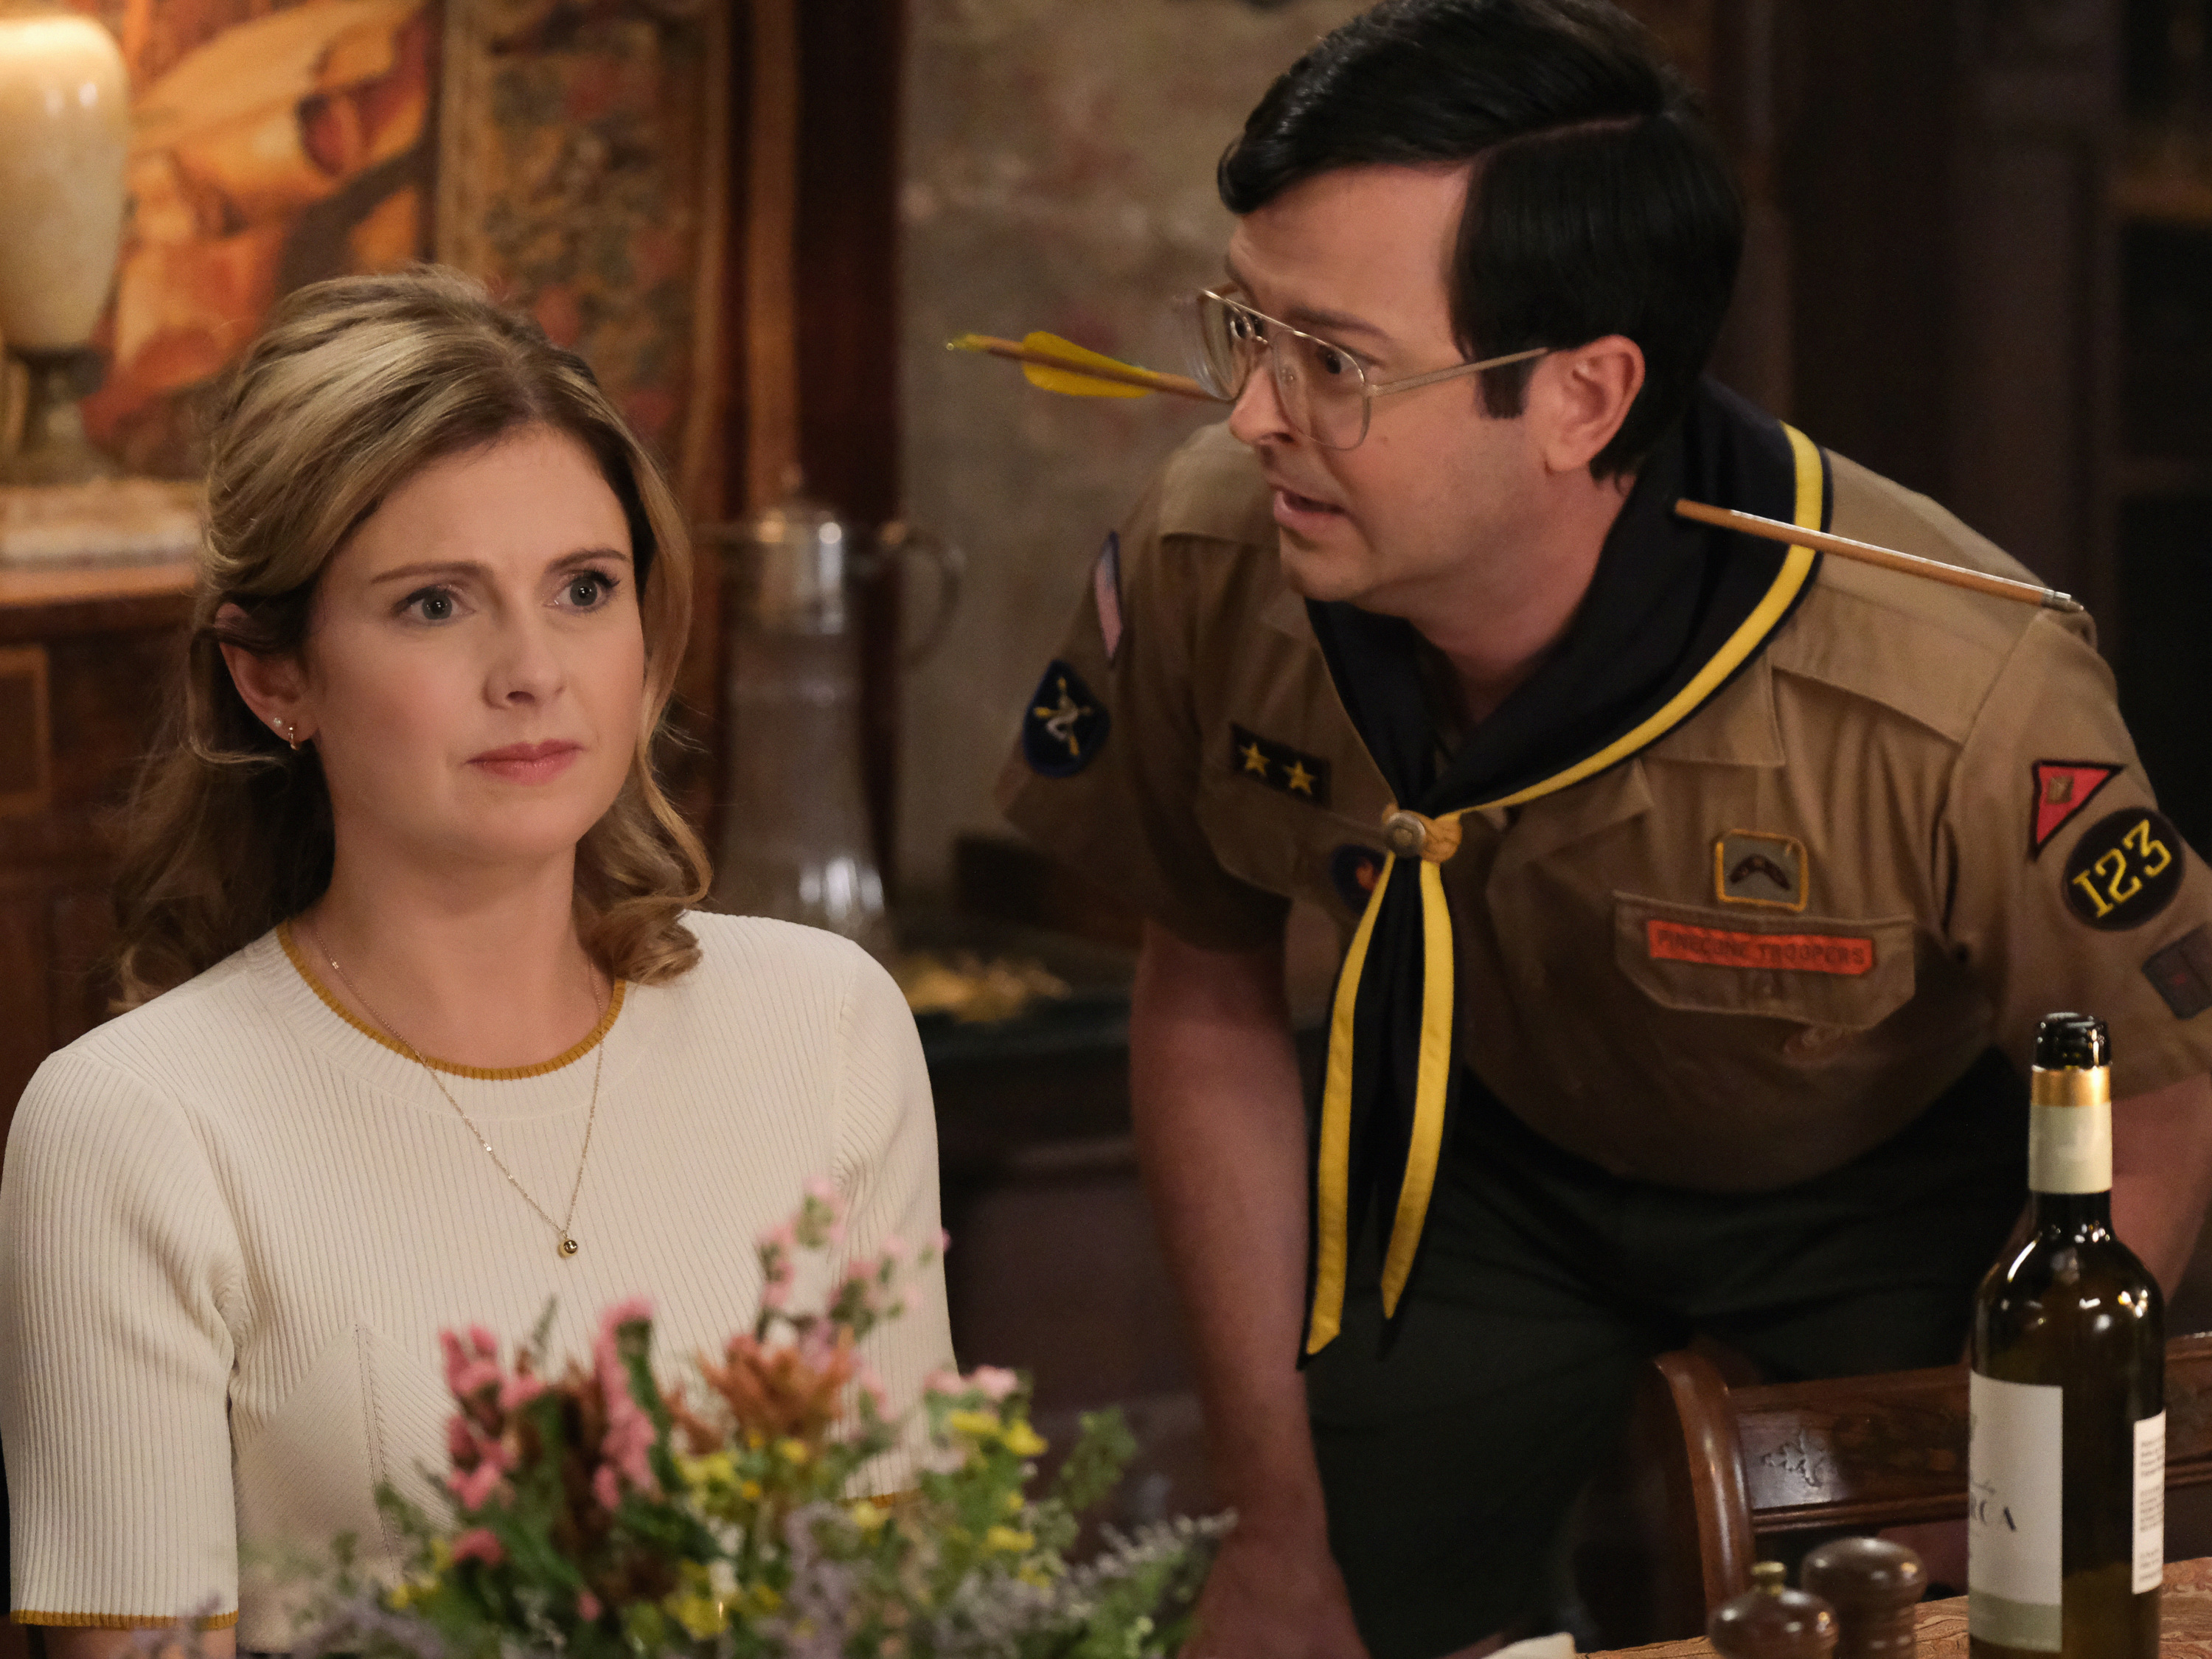 'Ghosts' actor Rose McIver in a white blouse, and Richie Moriarty in a Boy Scout uniform in a scene from the series.